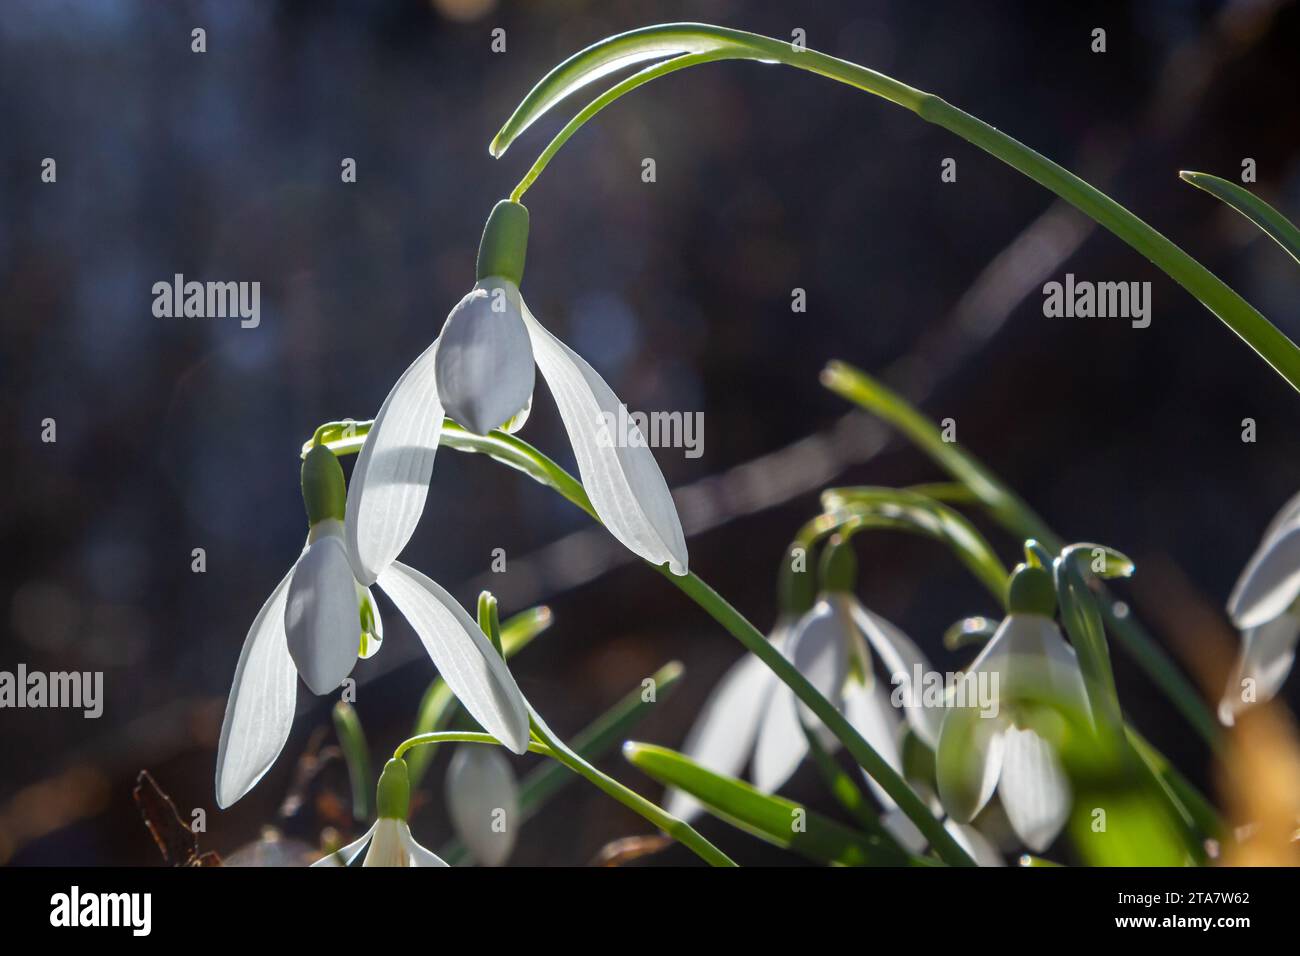 White snowdrop flower, close up. Galanthus blossoms illuminated by the sun in the green blurred background, early spring. Galanthus nivalis bulbous, p Stock Photo